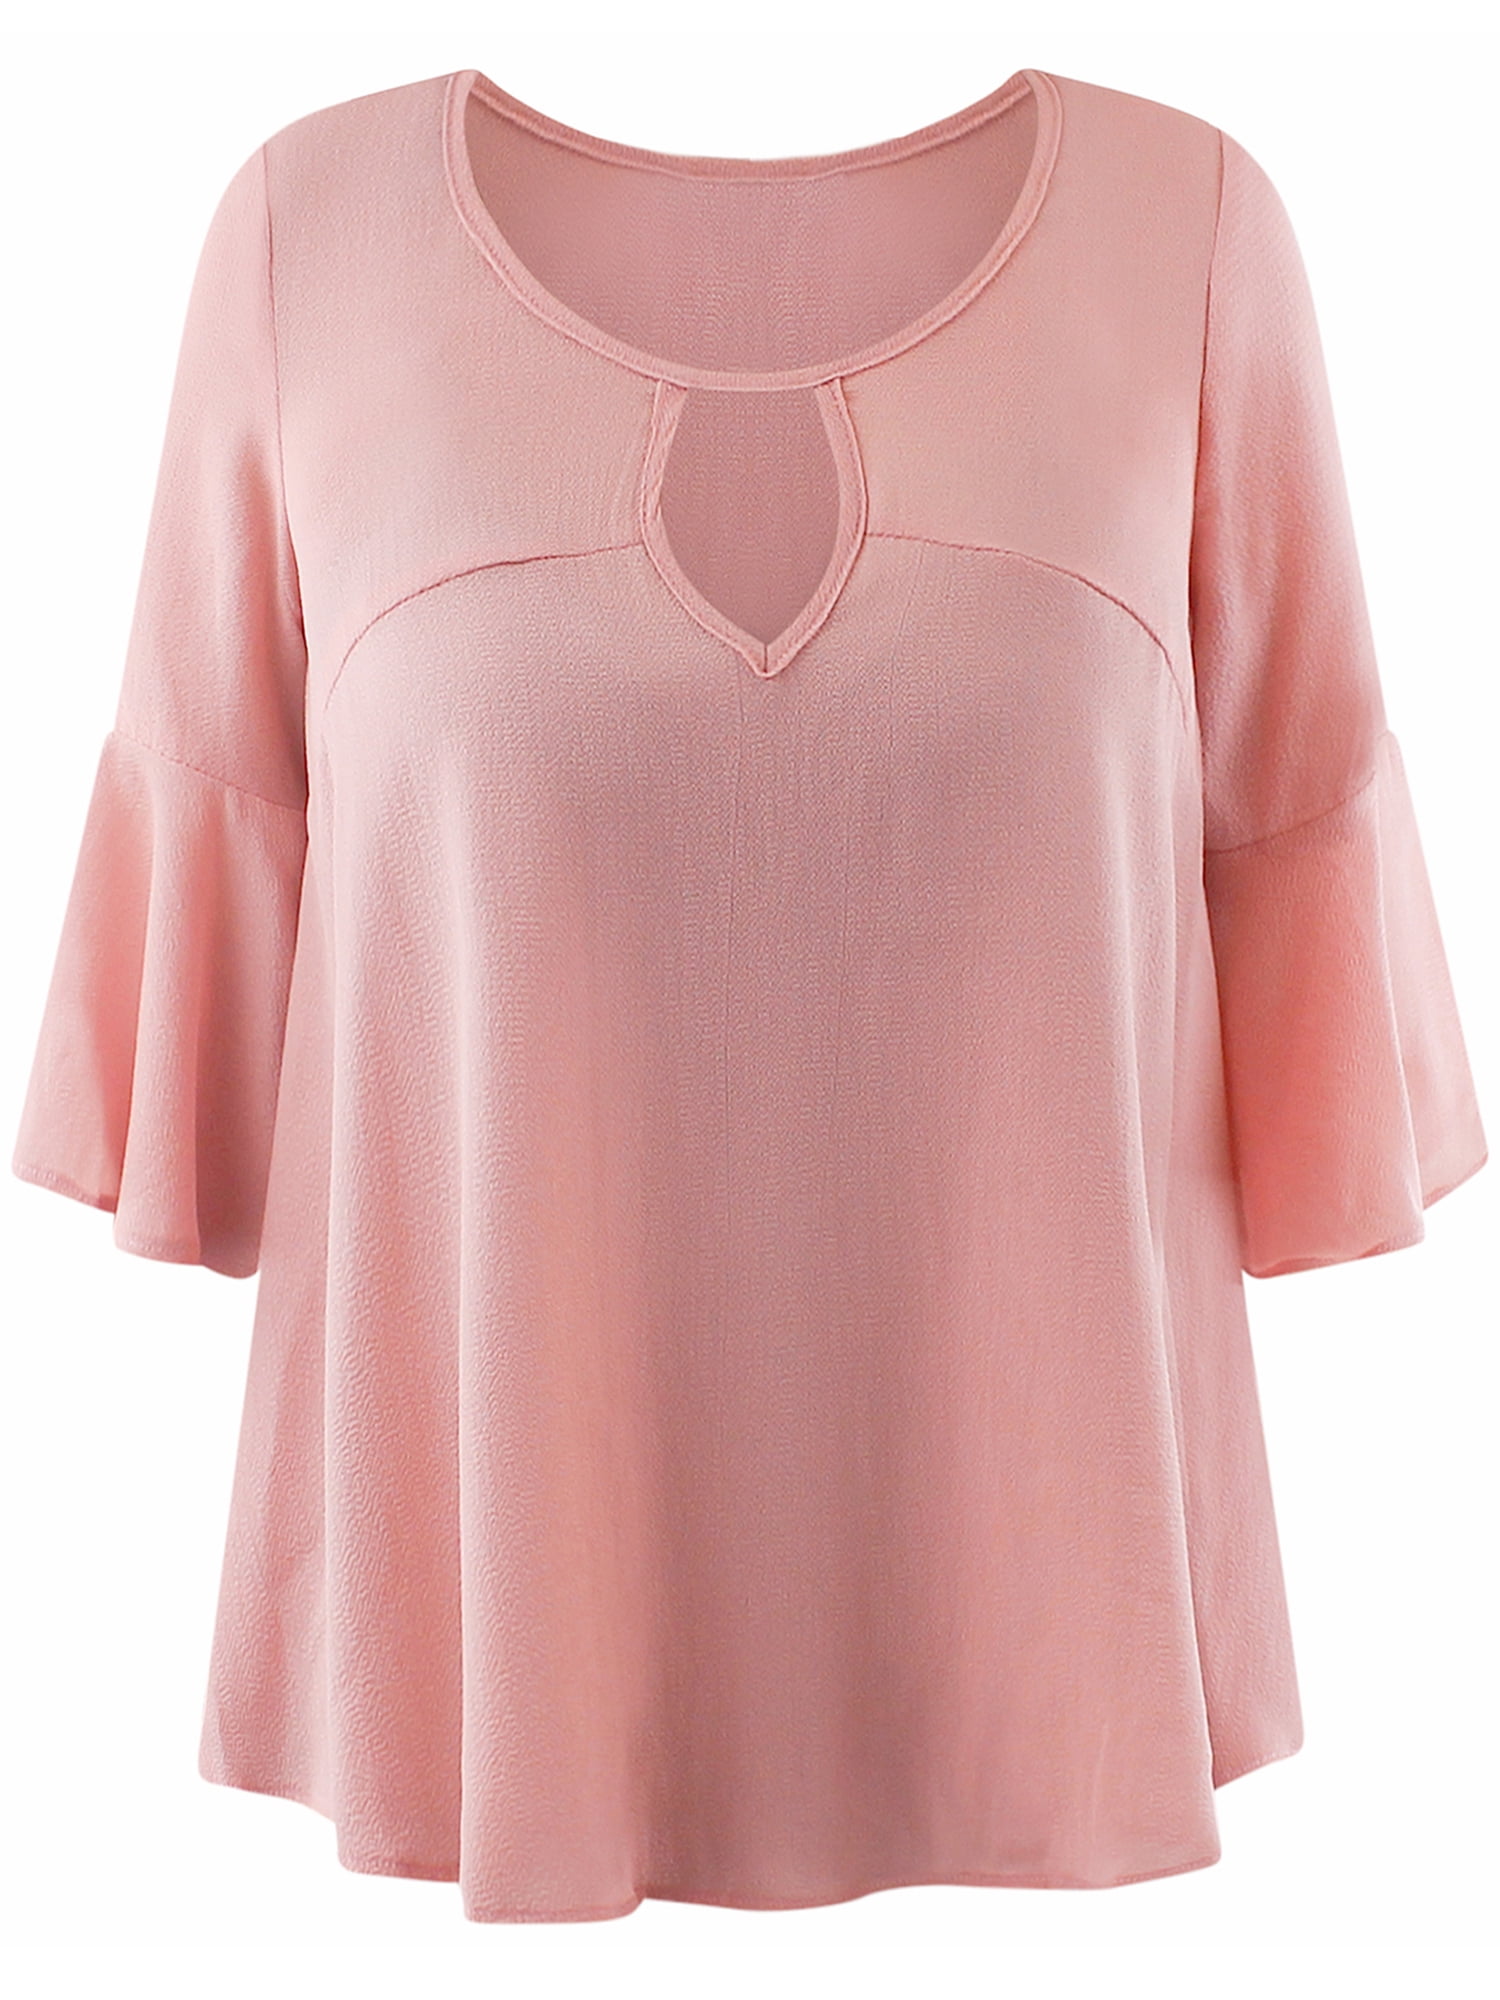 Womens Blush Pink Relaxed Fit Blouse Top With Bell Sleeves Size